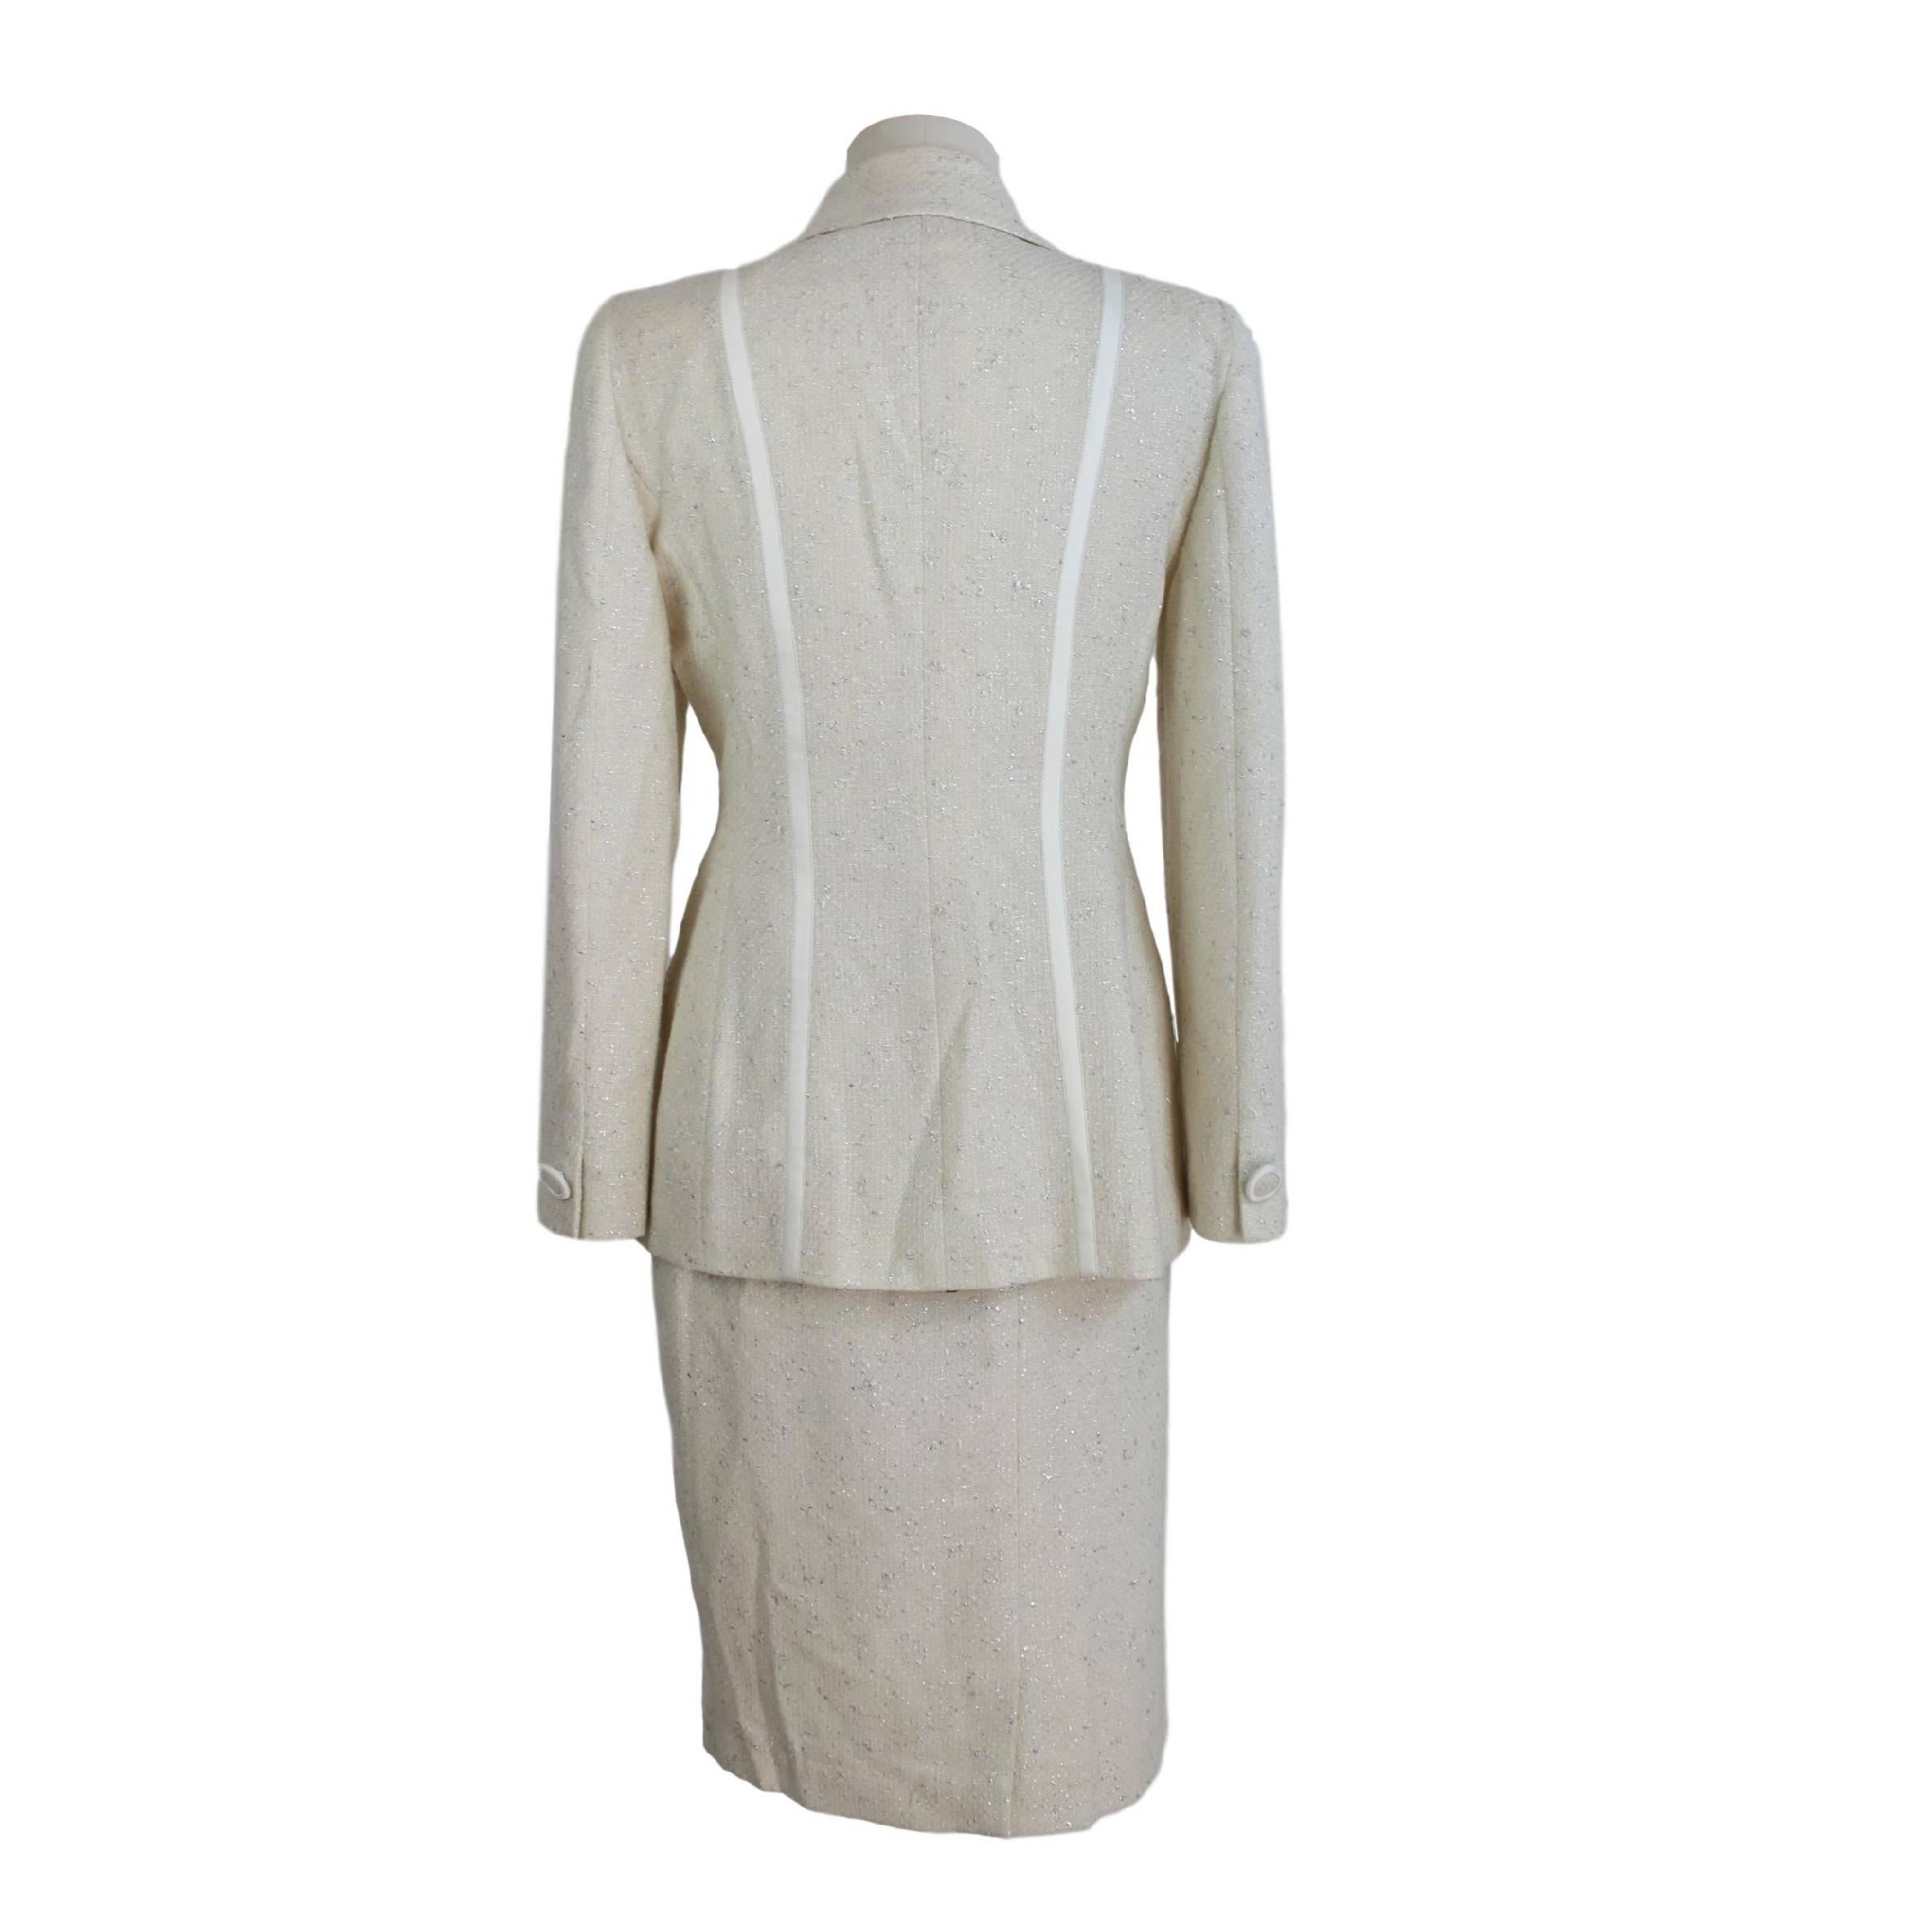 Annalisa Ferro elegant women's suit skirt. Suit consisting of jacket and skirt. White color with silver threads. The jacket with two buttons closure, two pockets on the sides. Along the satin pattern jacket. Long skirt on sheath knee. Made in Italy.